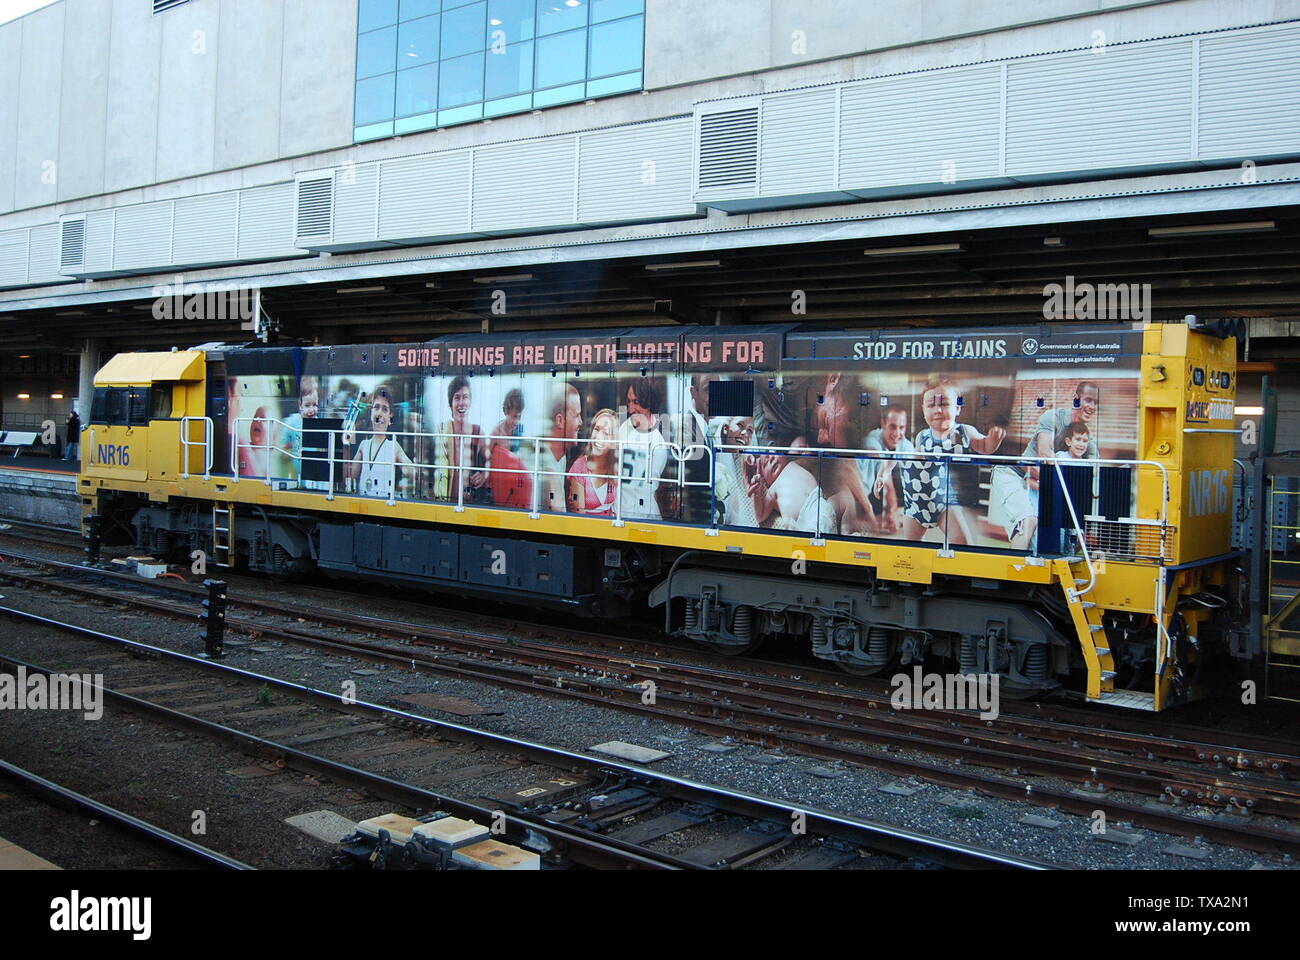 NR16 in a special livery promoting level crossing safety.; 8 August 2009; Created work; Alex1991; Stock Photo